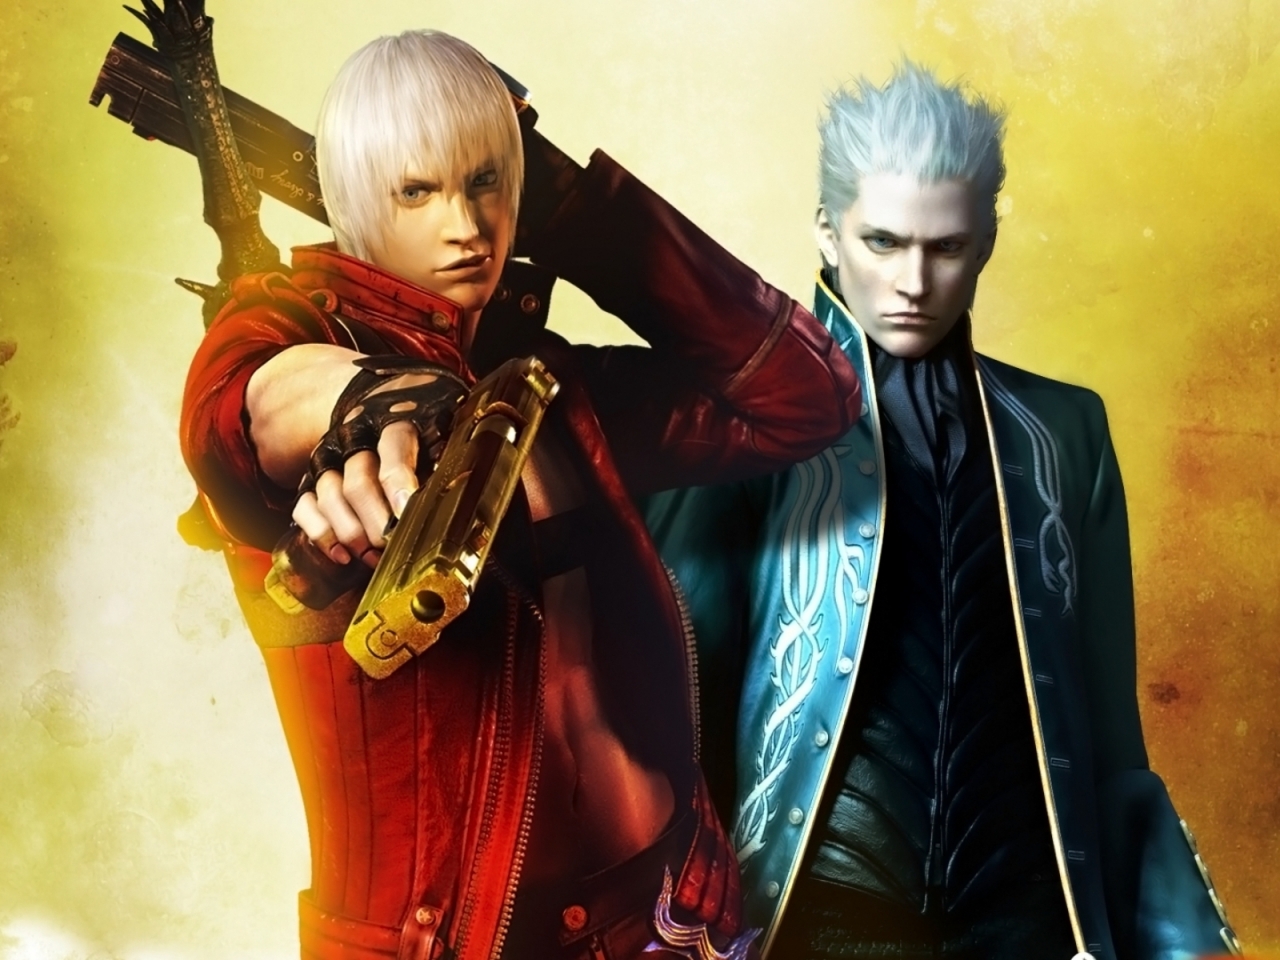 Devil may cry 3 for 1280 x 960 resolution